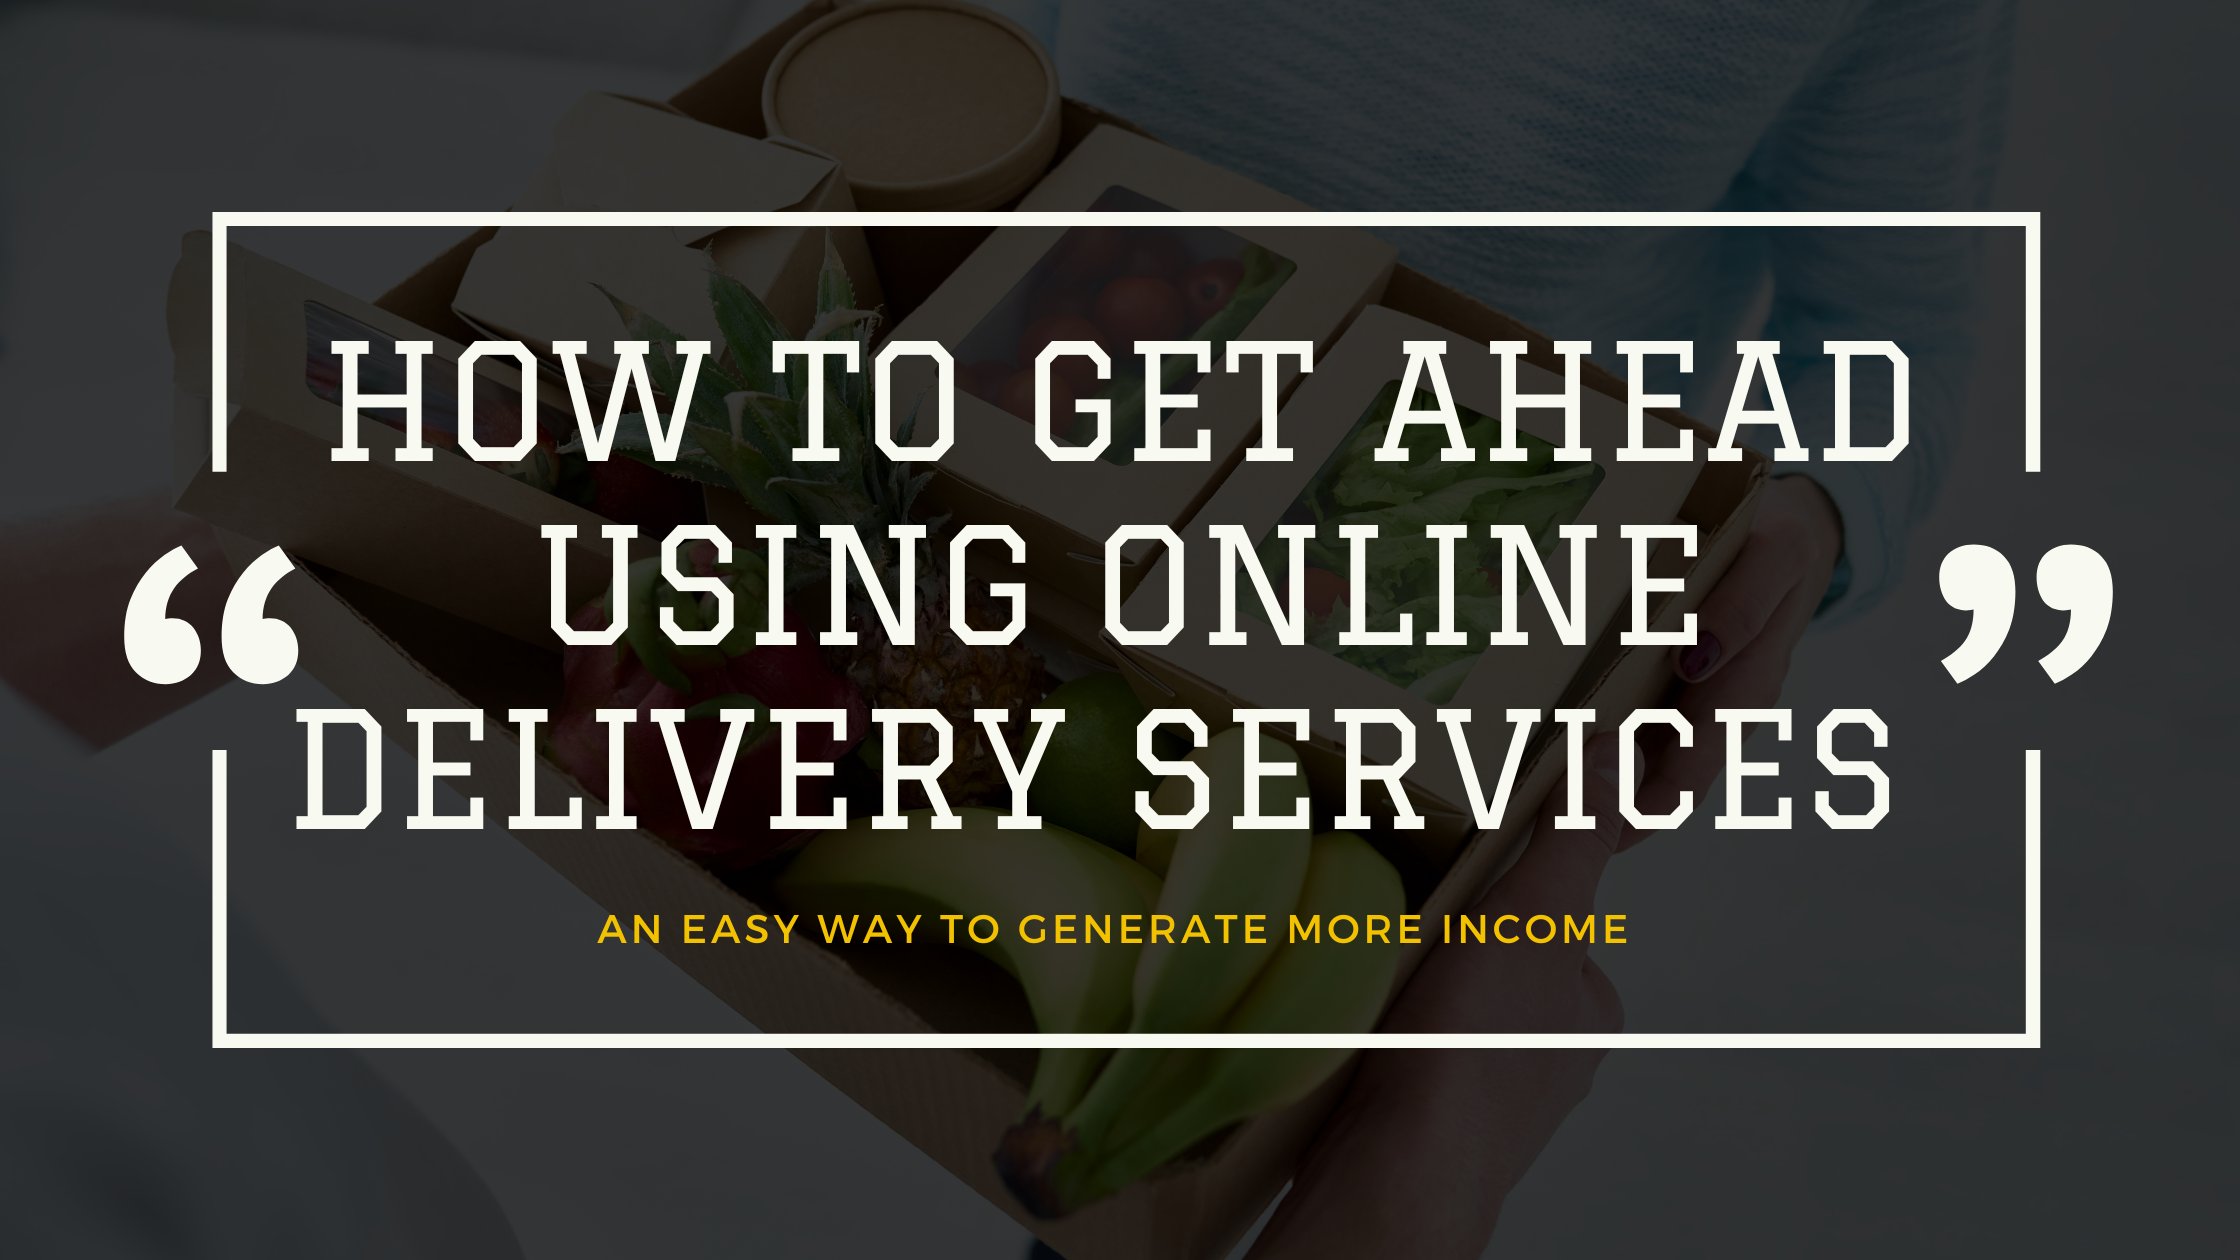 How To Get Ahead With Online Delivery Services